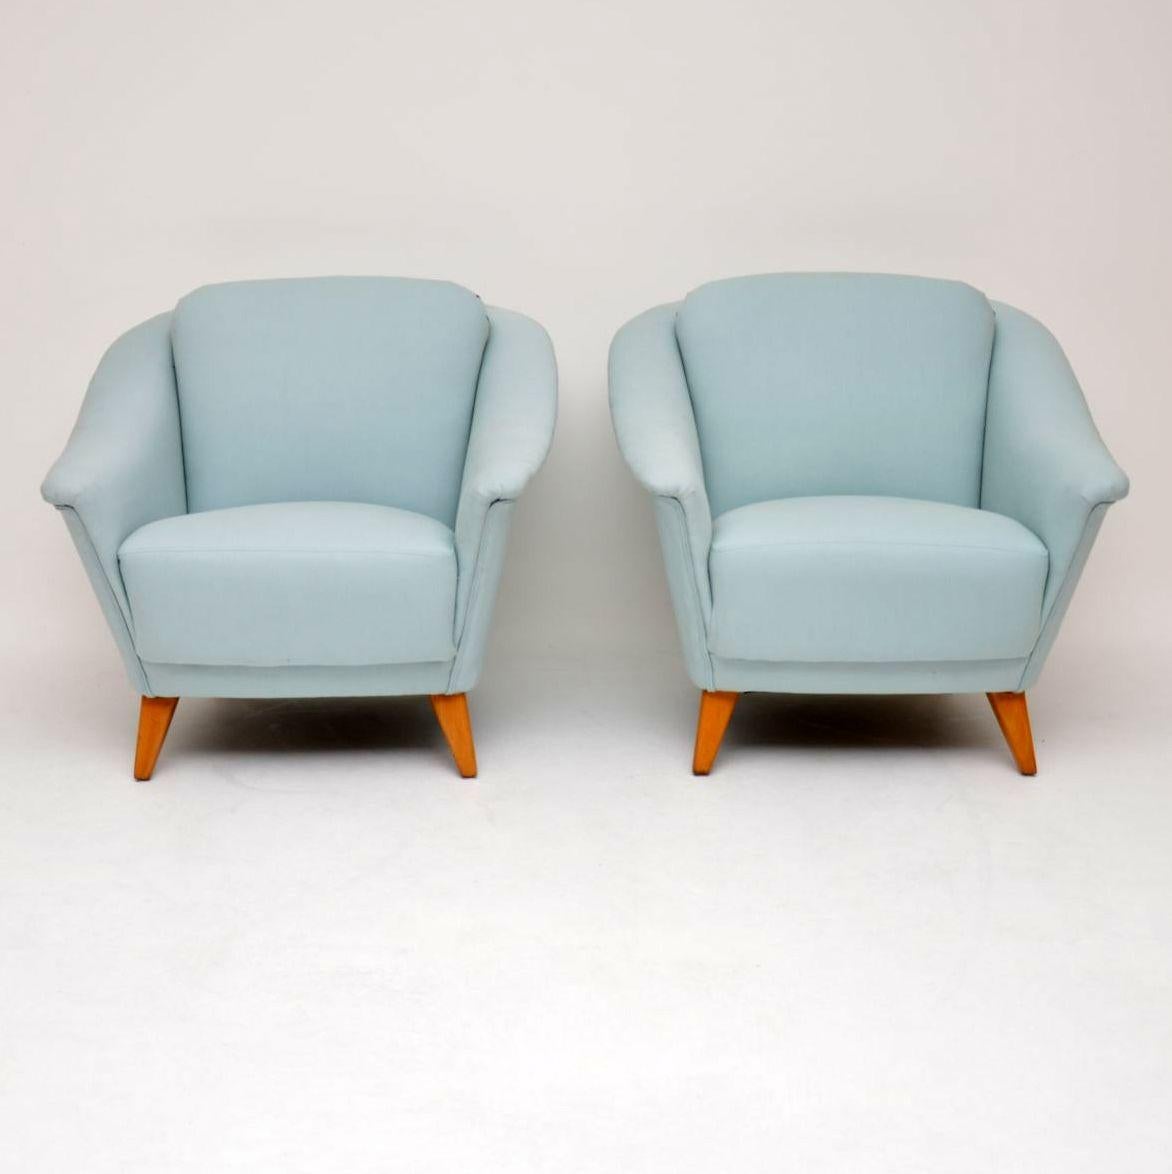 An absolutely beautiful and really well made pair of vintage armchairs from the 1960s, these were made in Sweden. We have had them fully upholstered in a lovely light blue fabric, the legs have also been fully stripped and re-polished, so the